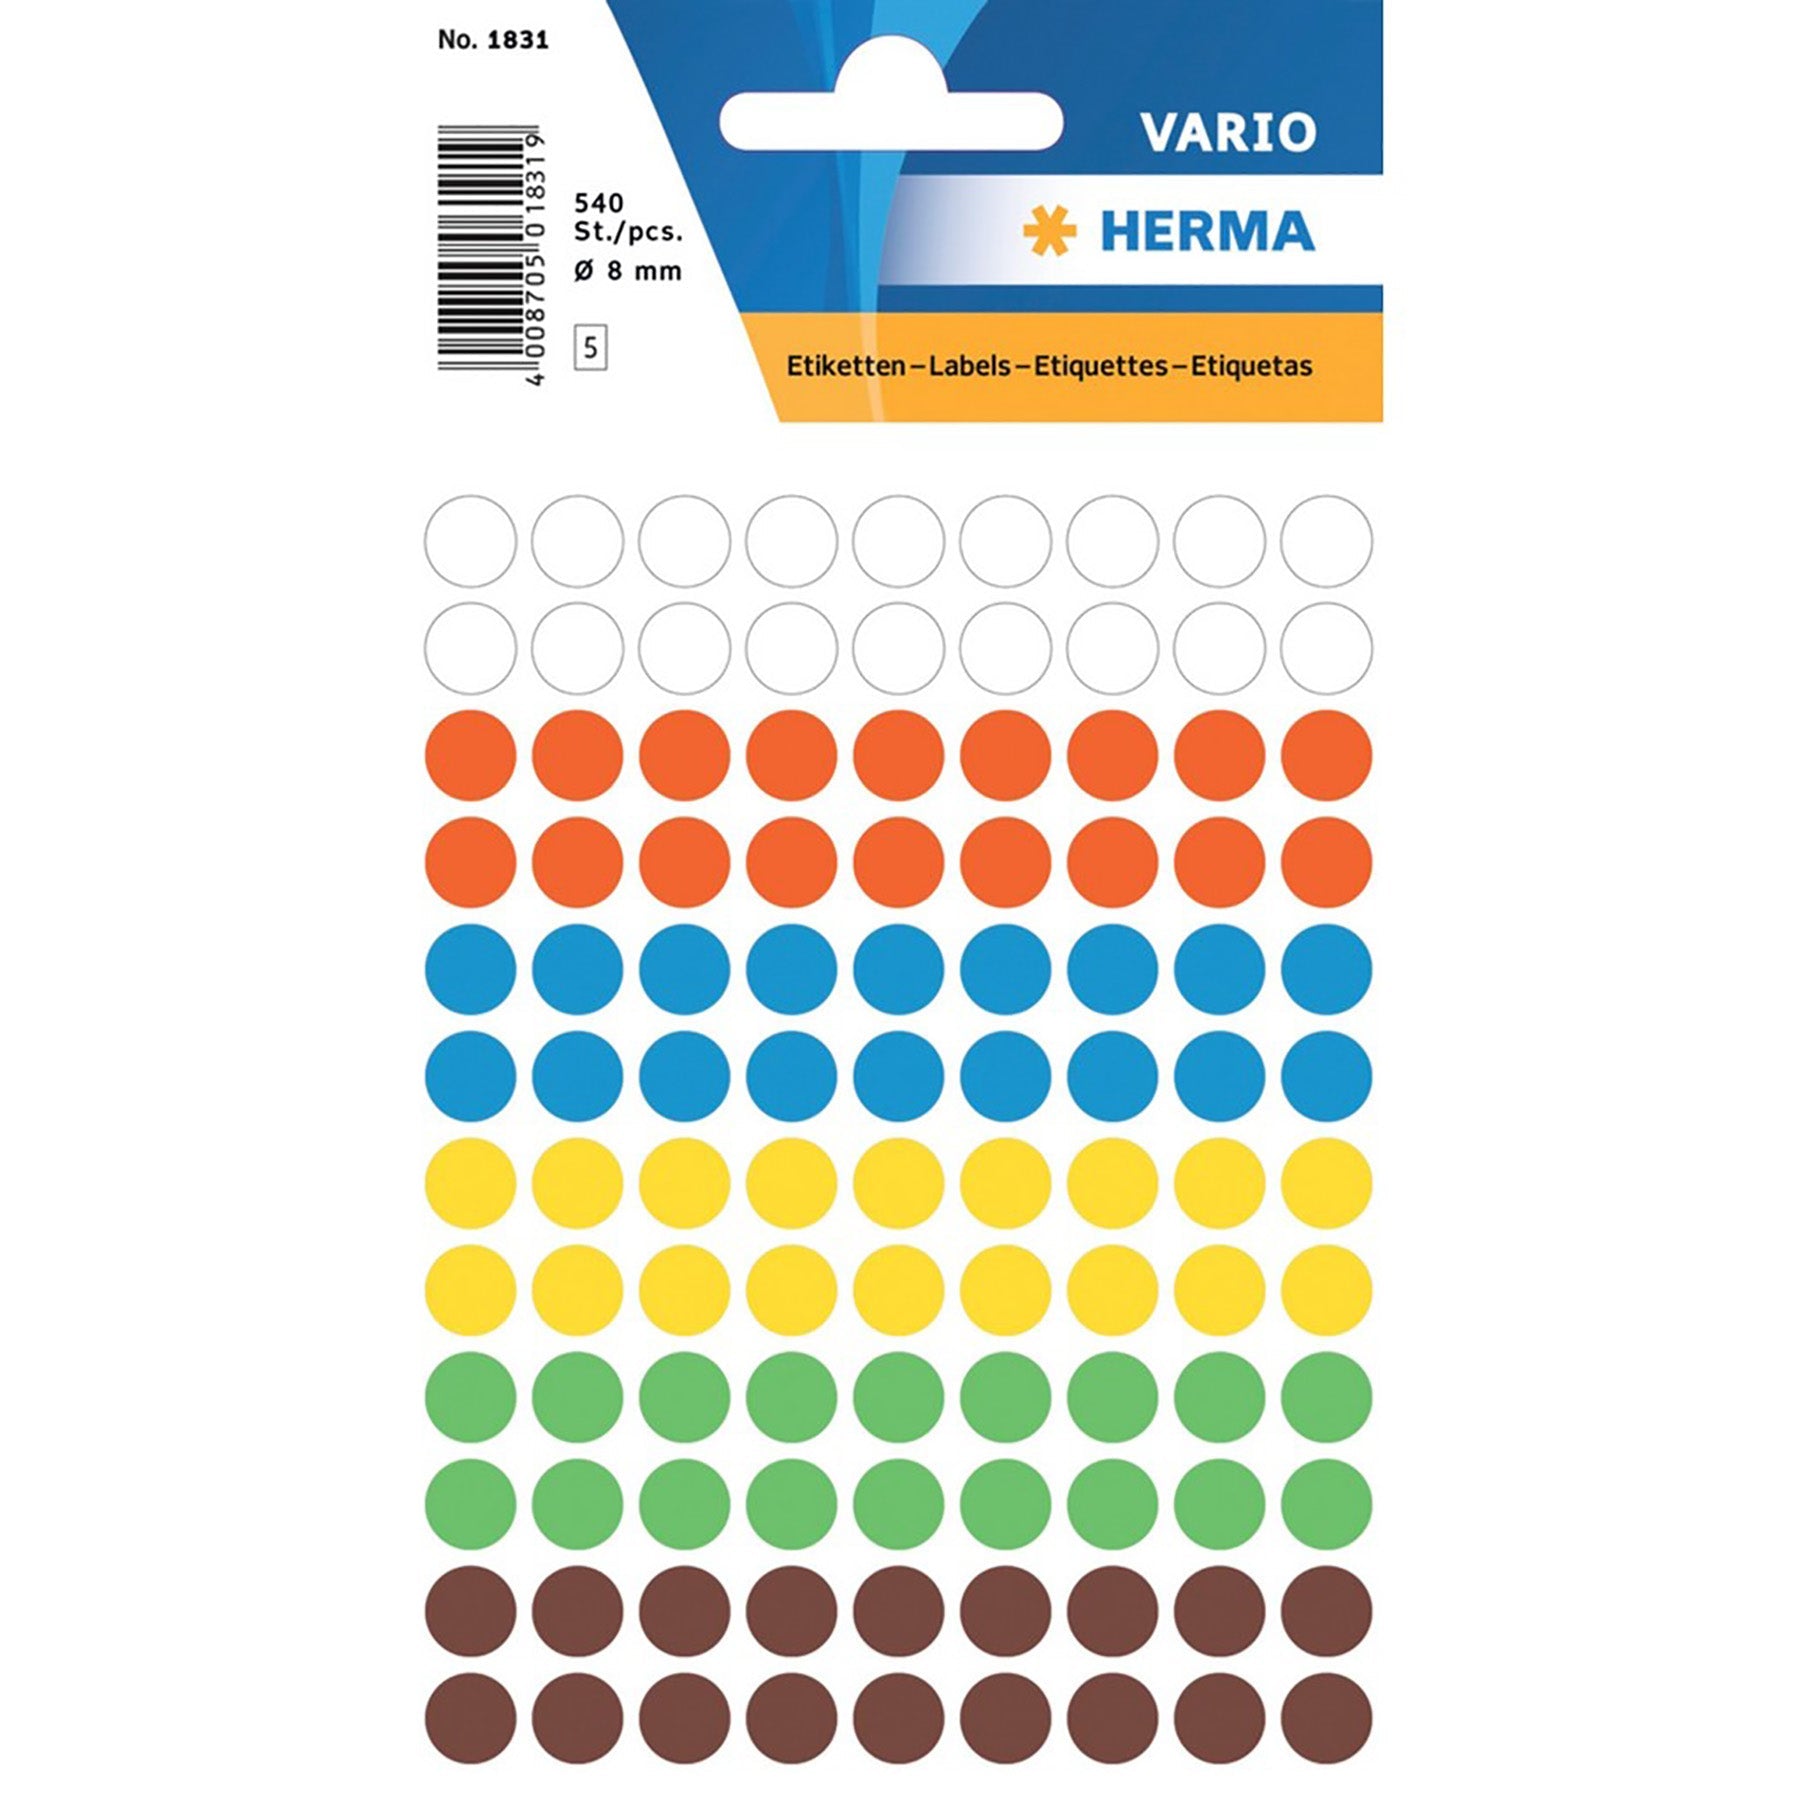 Herma Vario 5 Sheets Colour-Coding Round Labels Dots, Assorted 0.31in